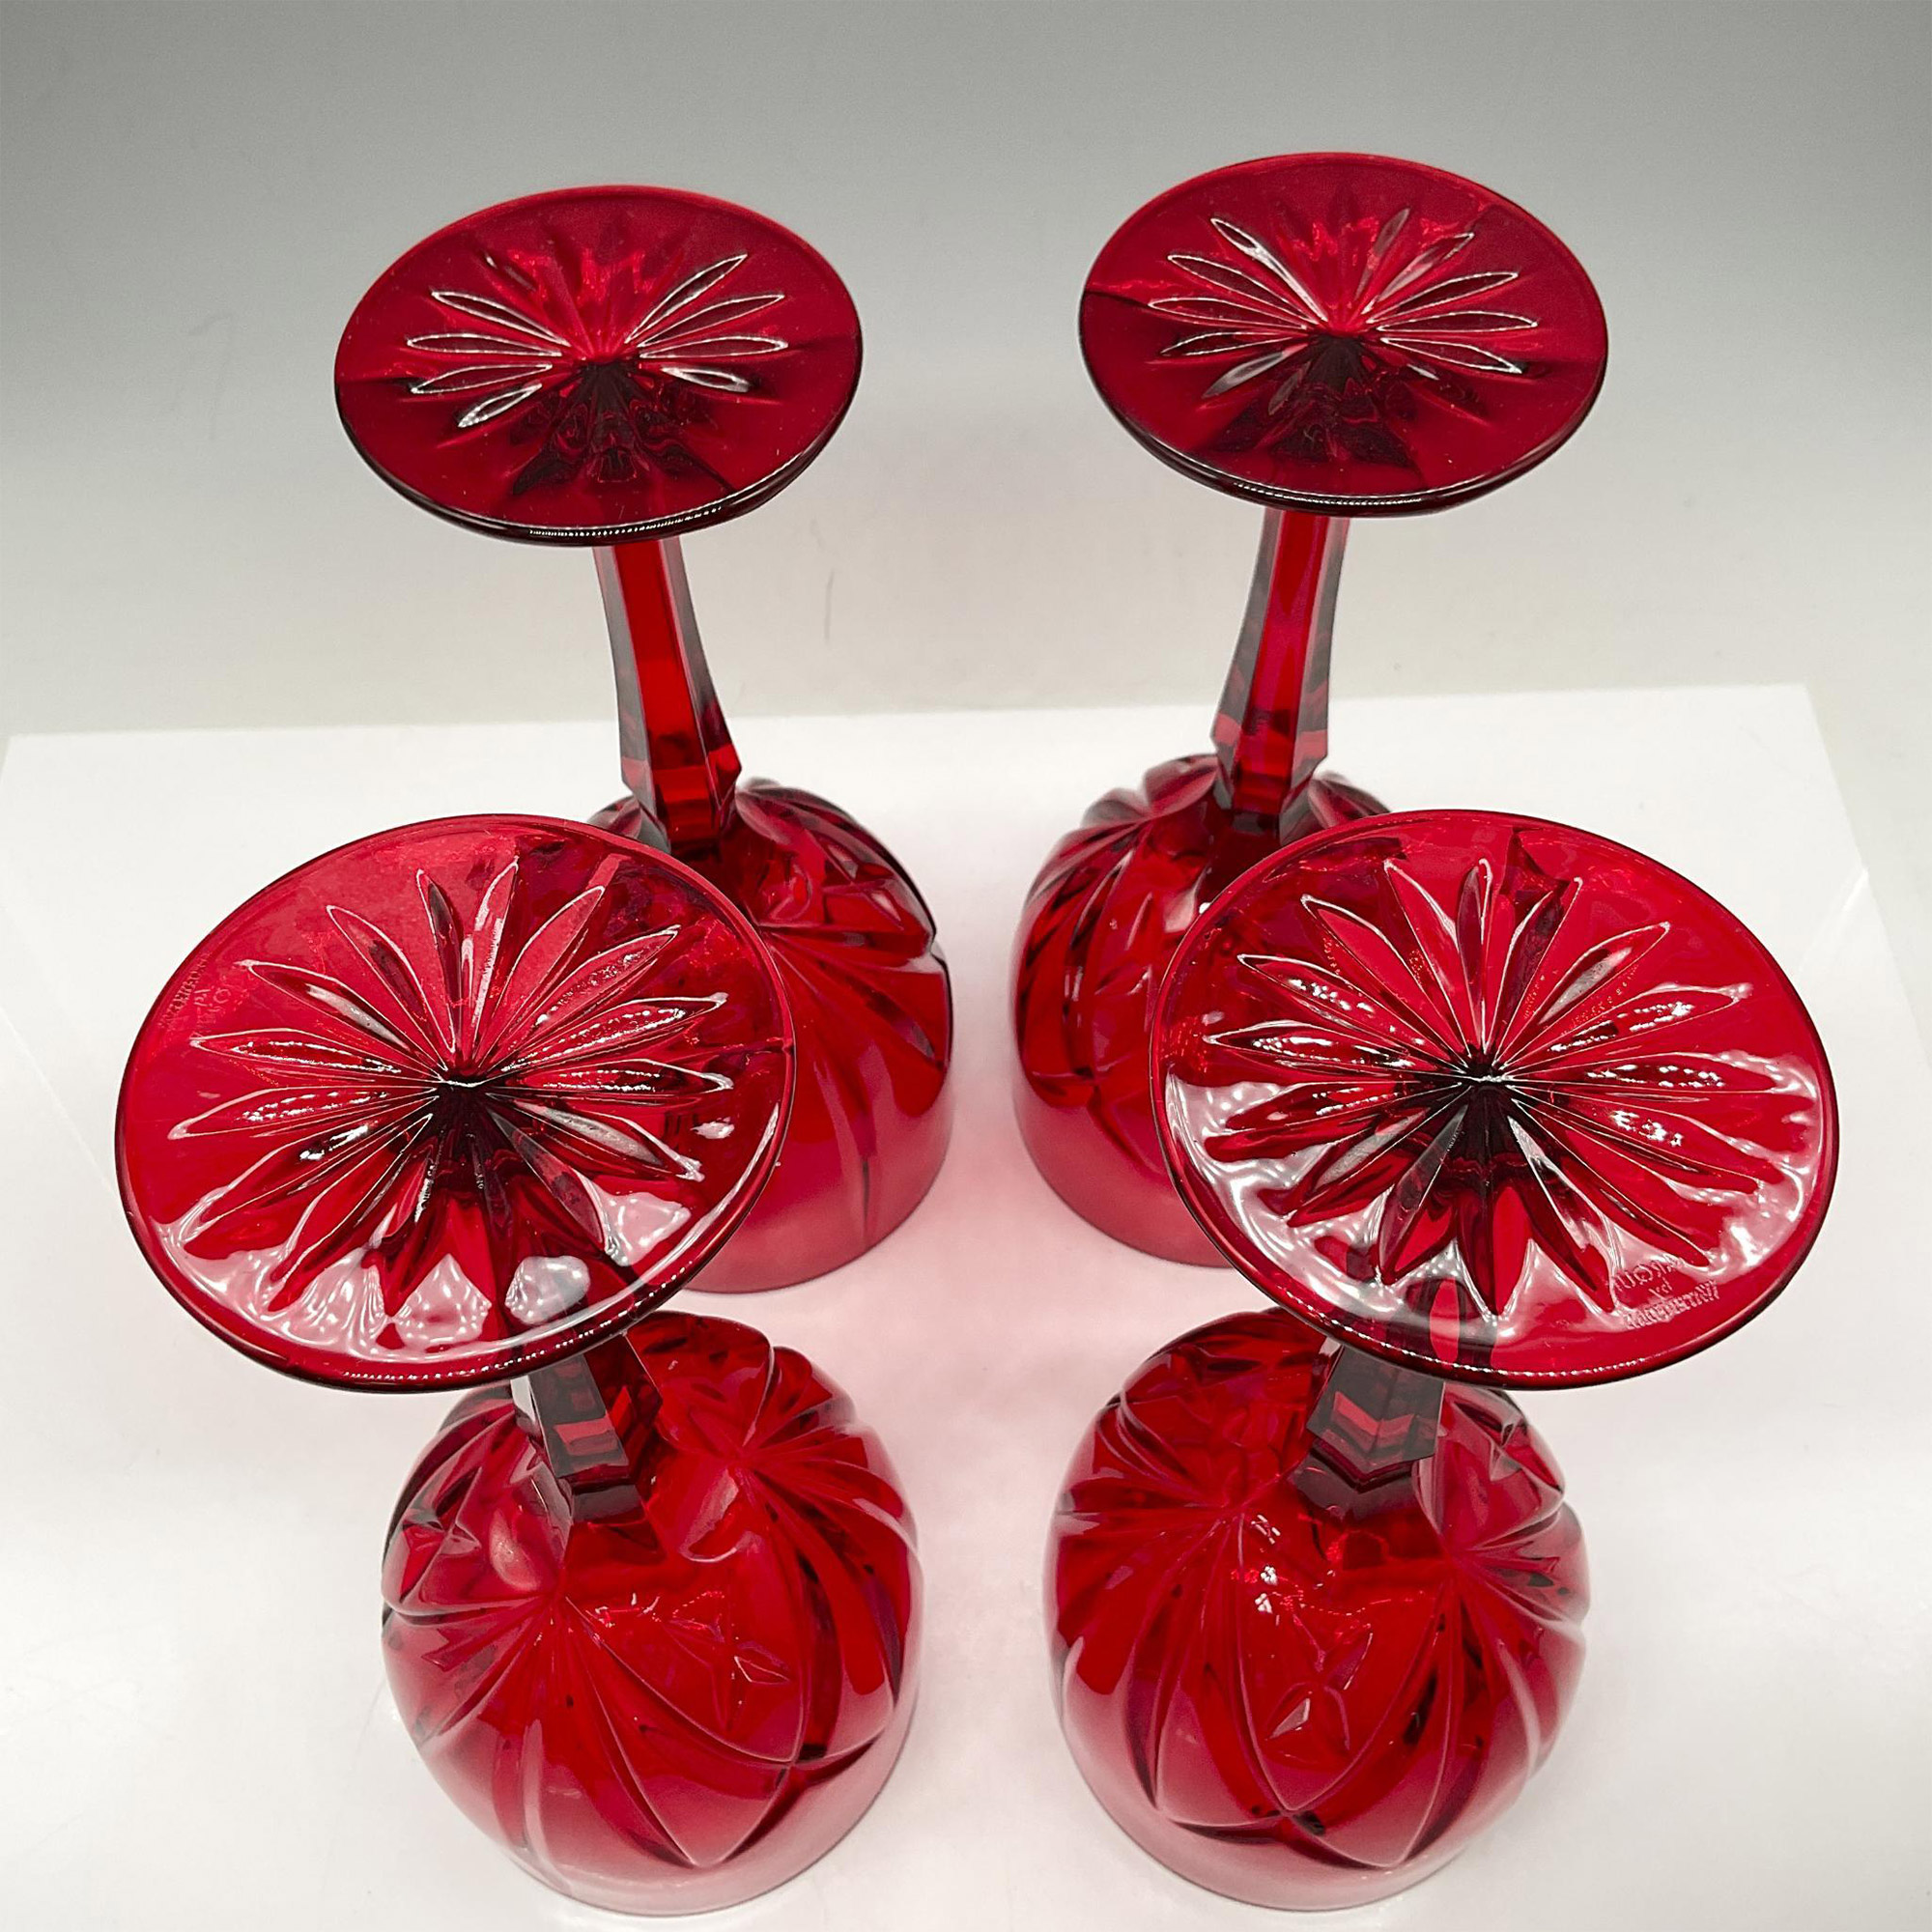 Marquis Waterford Brookside Red All Purpose Wine, Set of 4 - Image 3 of 4